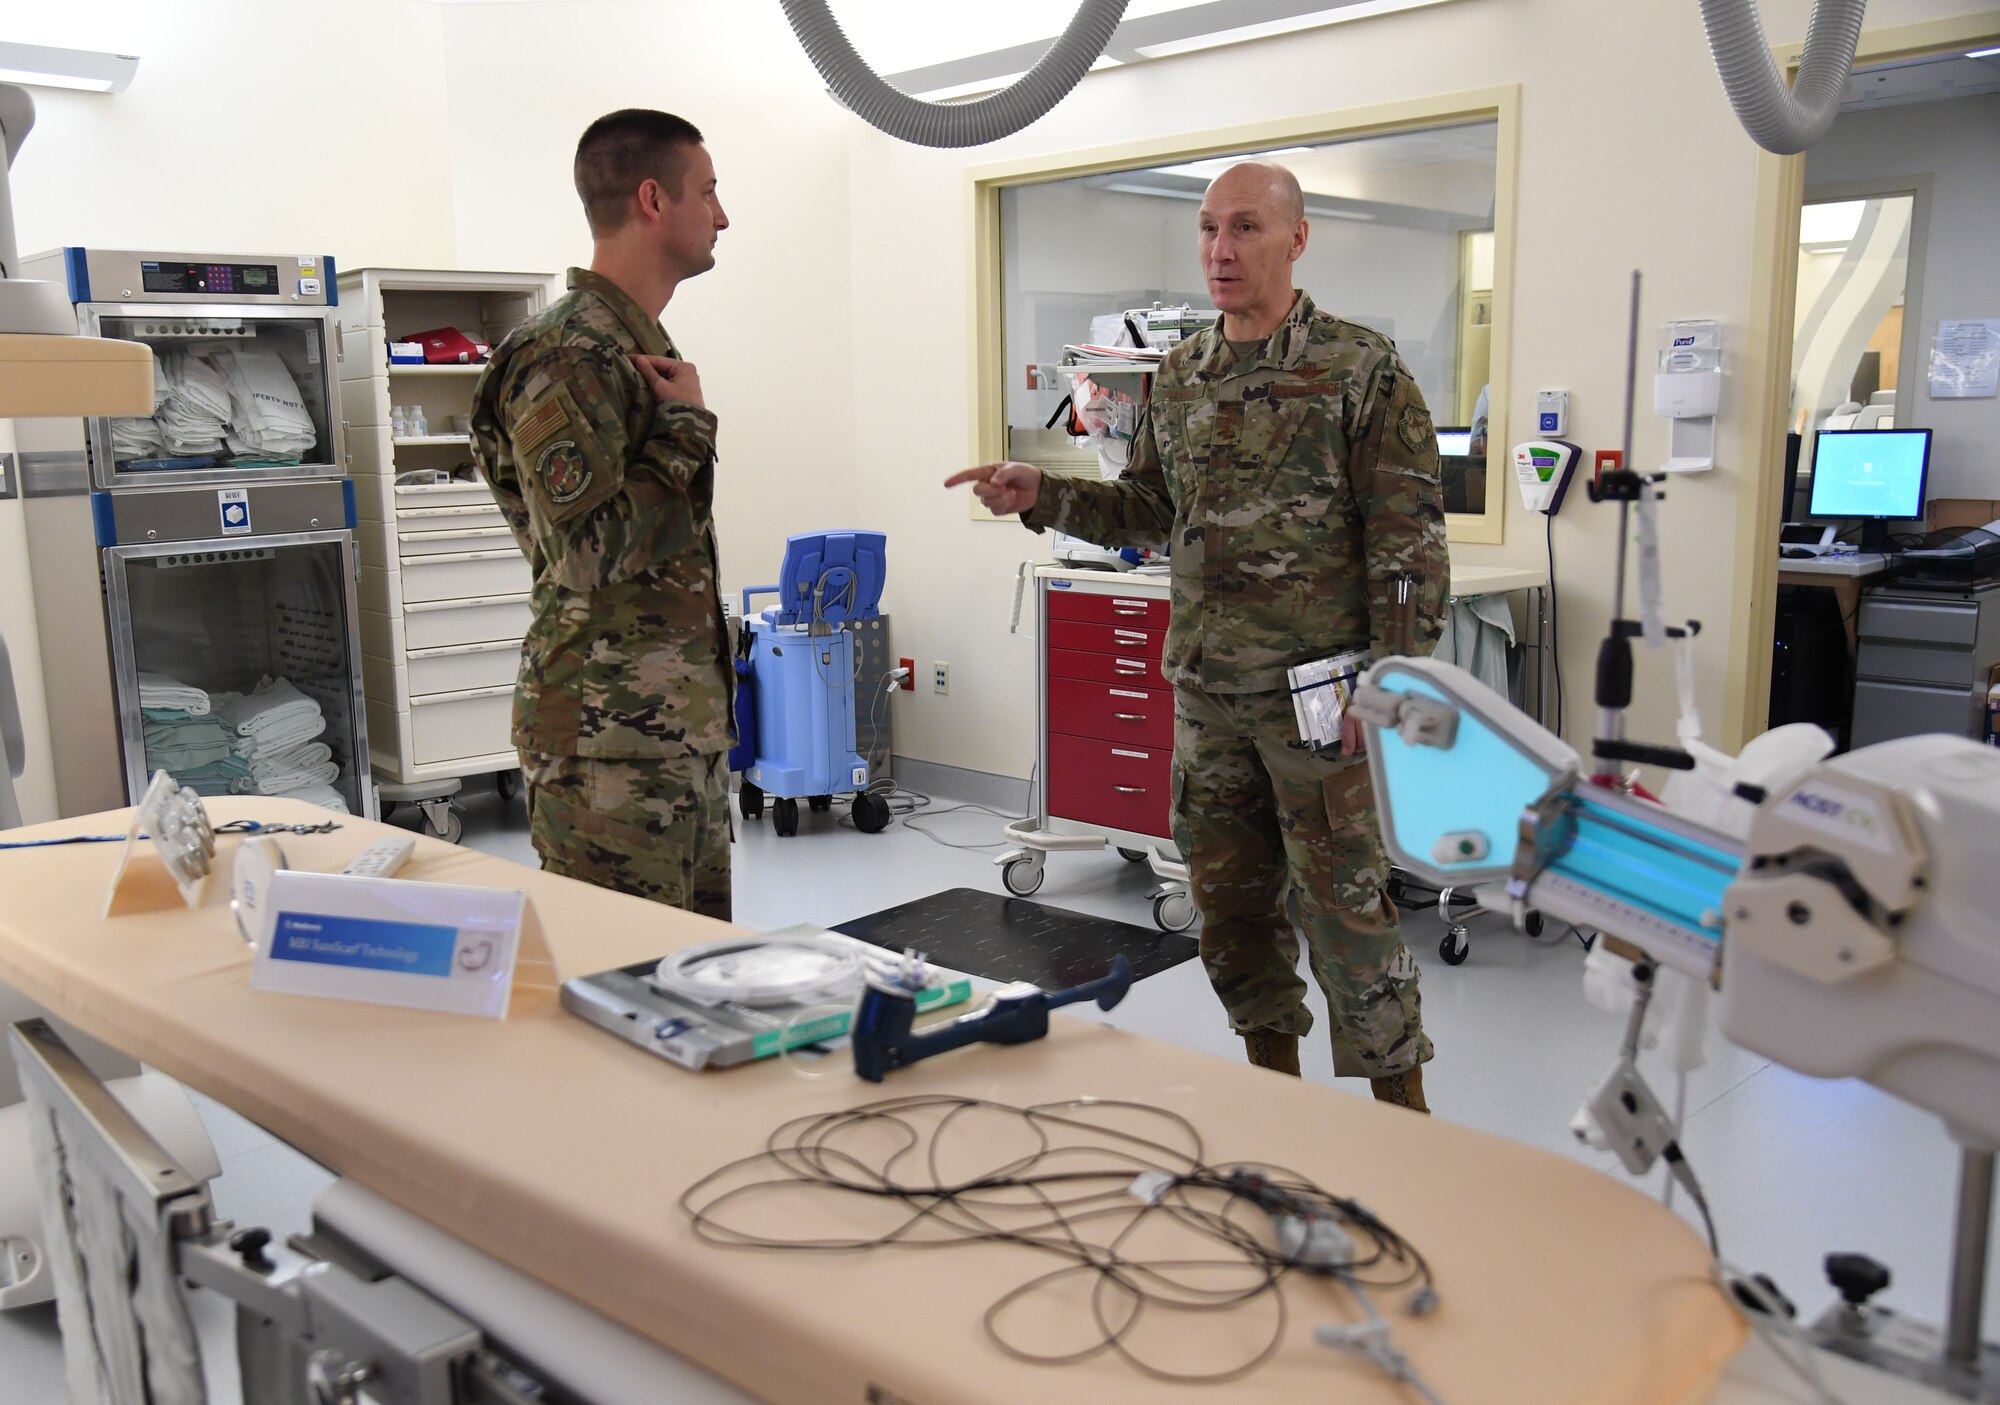 U.S. Air Force Gen. David Allvin, Vice Chief of Staff of the Air Force, and Lt. Col. Frank Russo, 81st Healthcare Operations Squadron interventional cardiologist, discuss the cardiac catheterization lab capabilities inside the Keesler Medical Center at Keesler Air Force Base, Mississippi, Nov. 18, 2022.